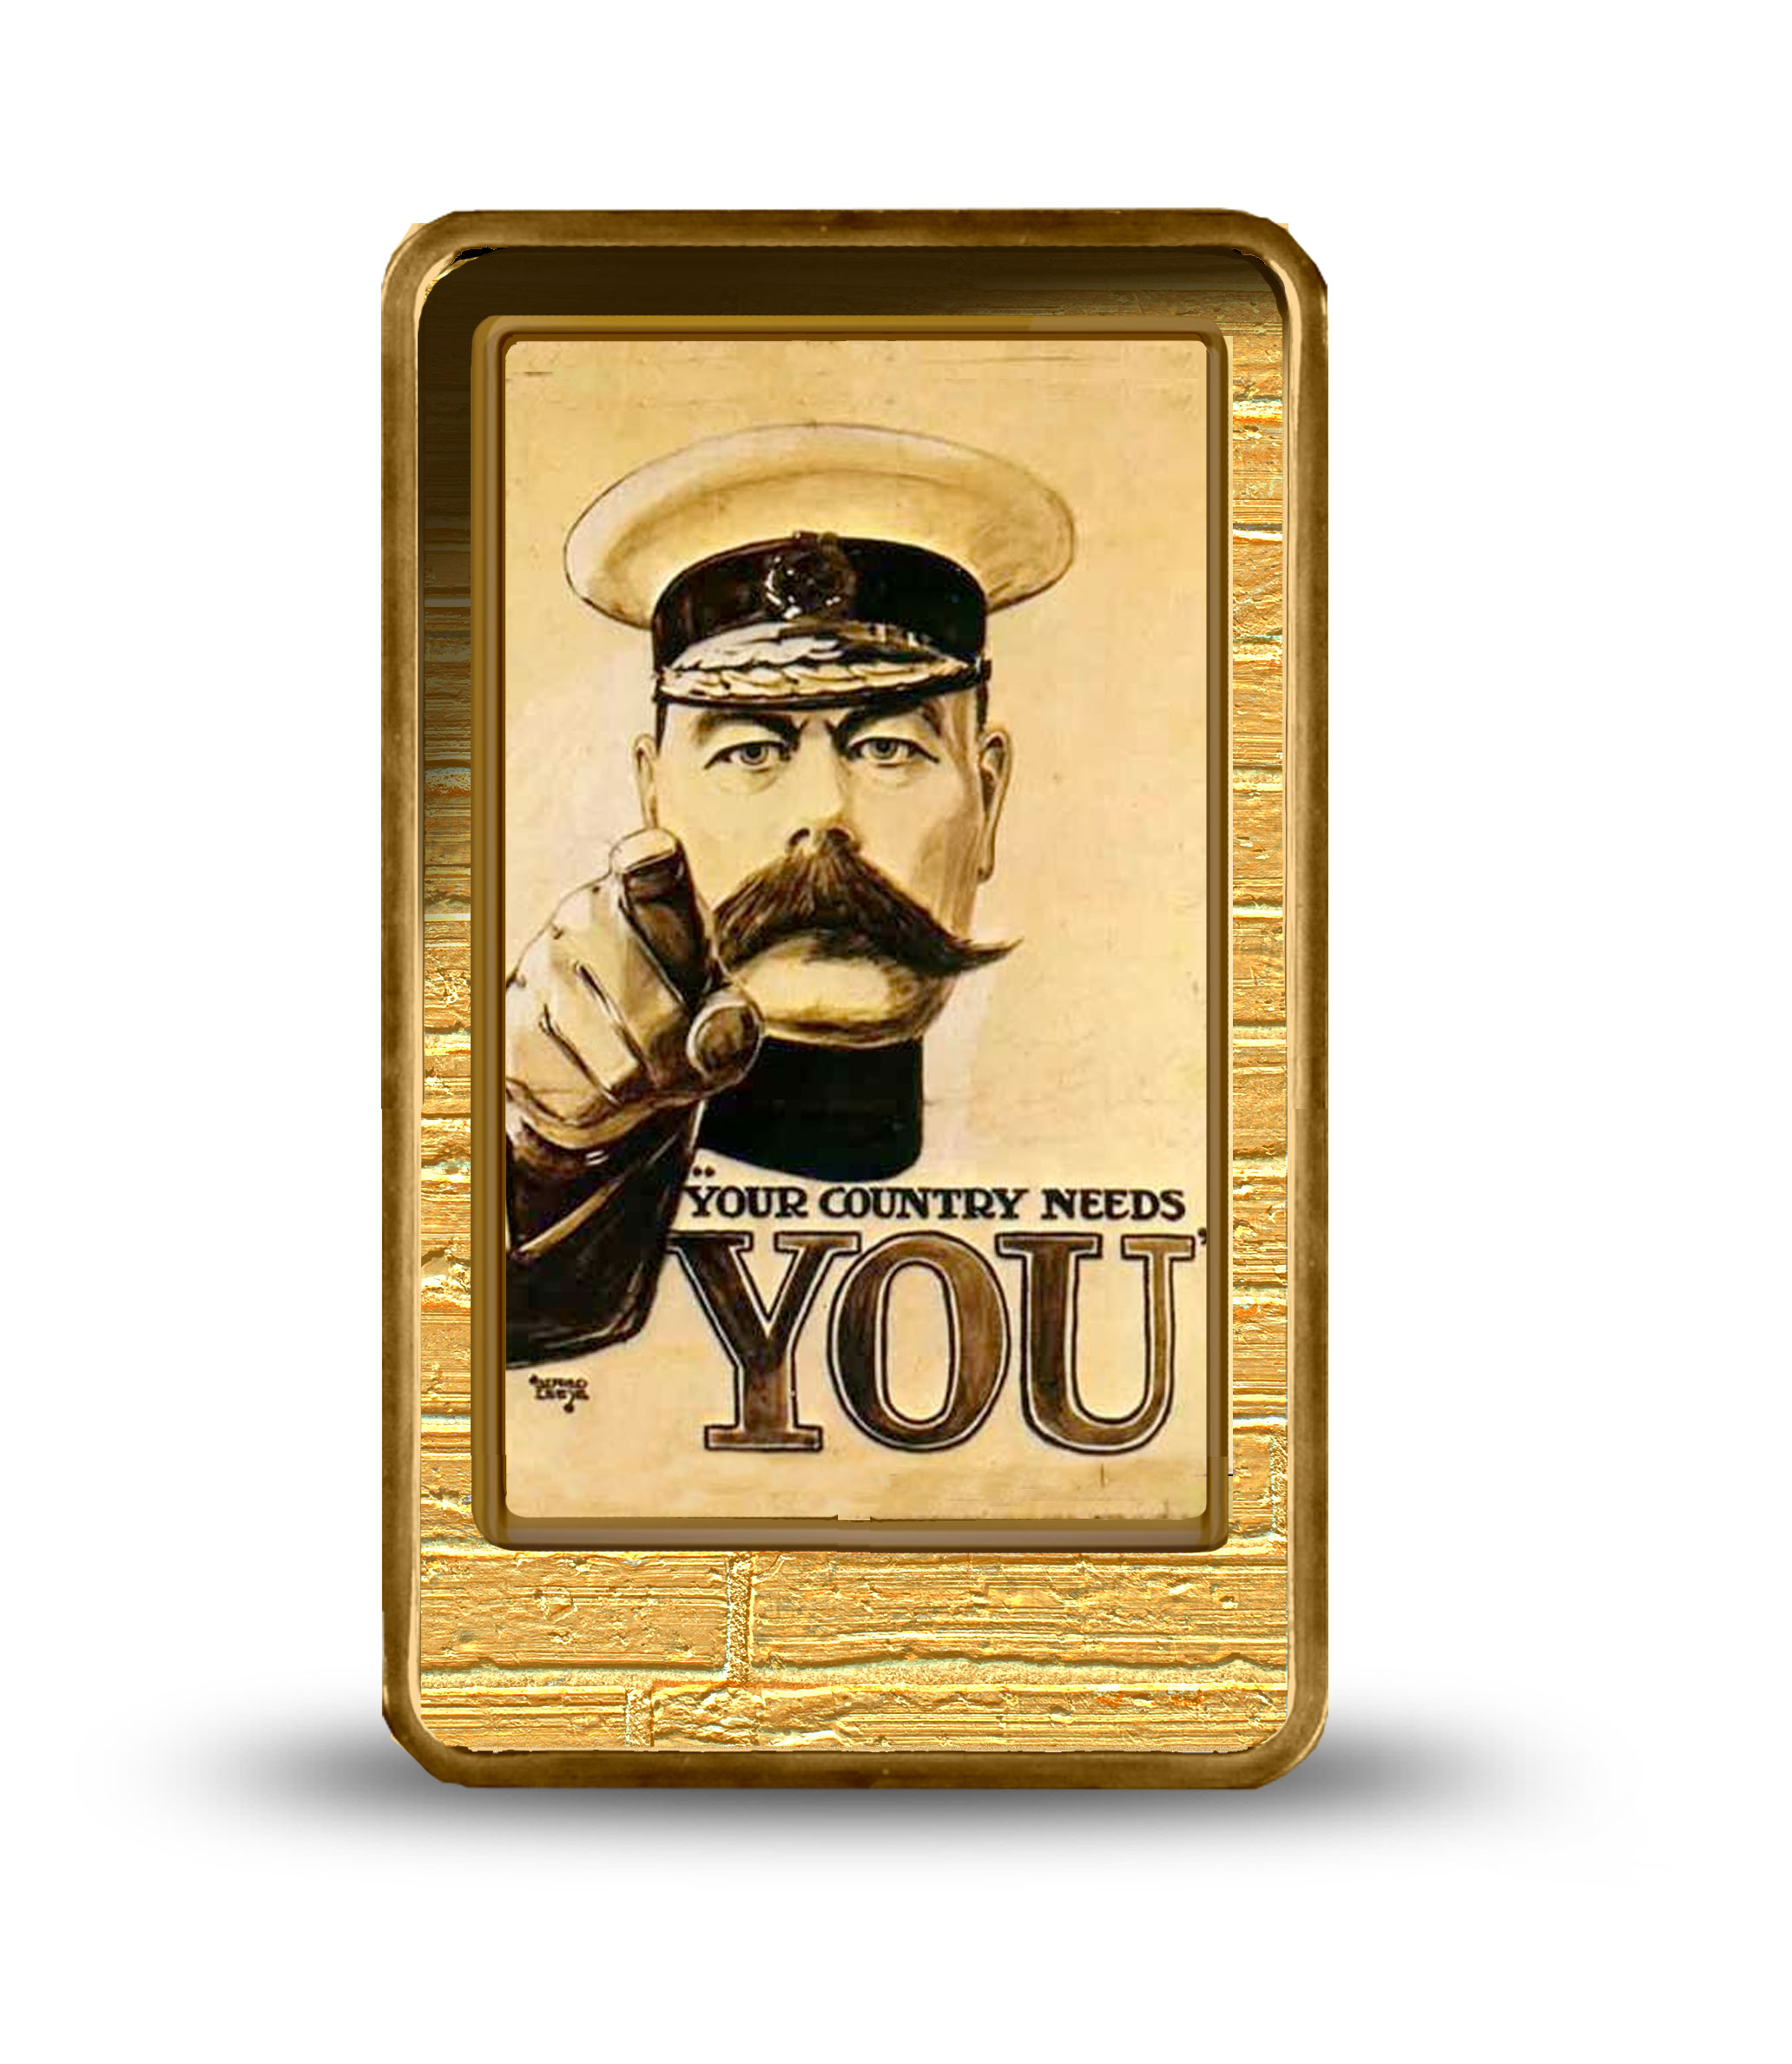 <p>Your Country Needs You</p>
